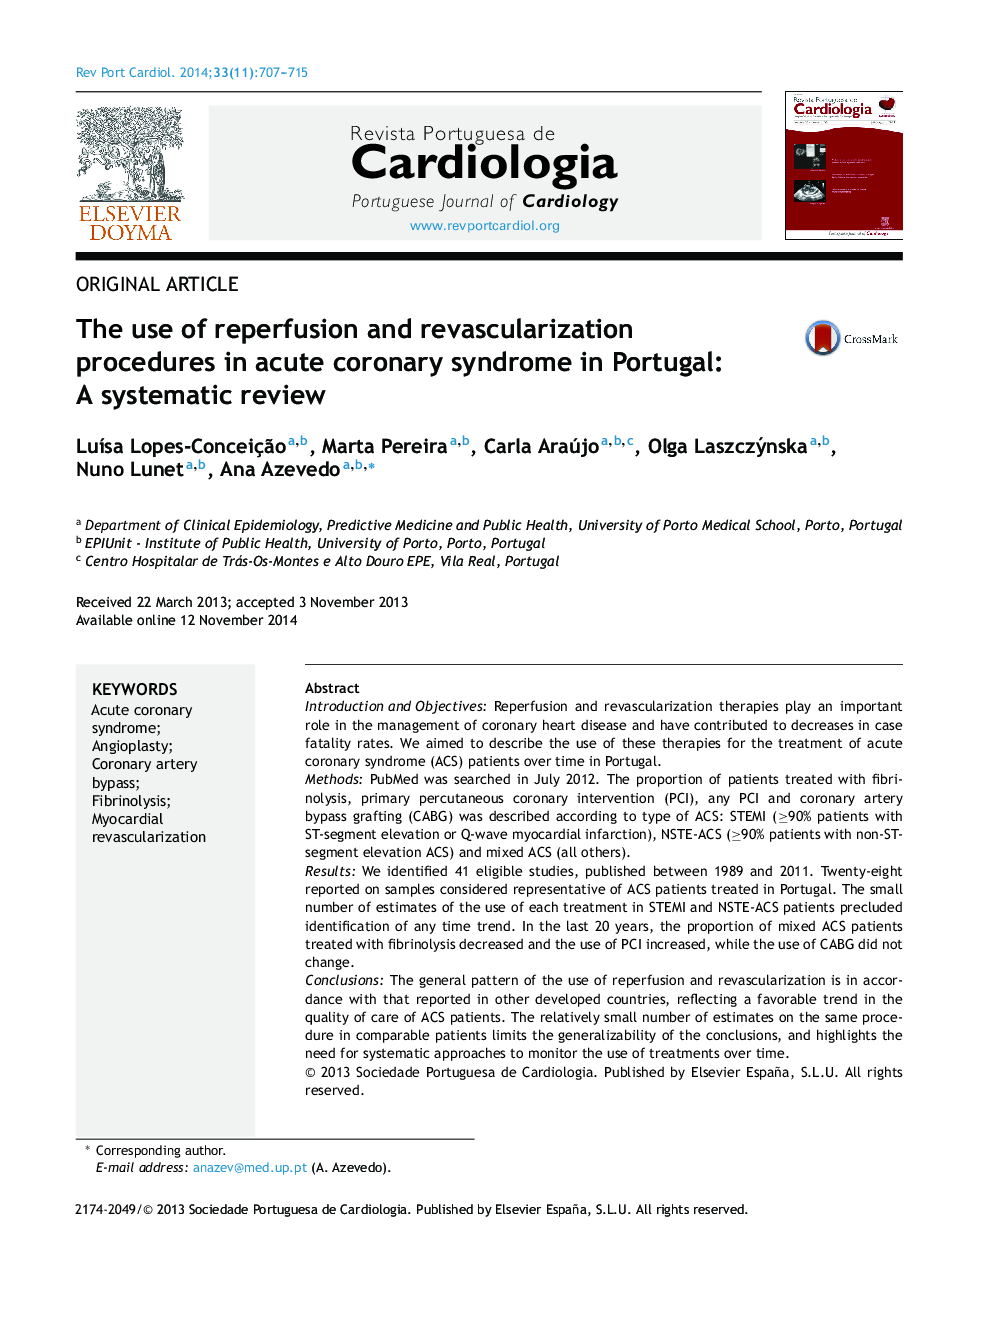 The use of reperfusion and revascularization procedures in acute coronary syndrome in Portugal: A systematic review